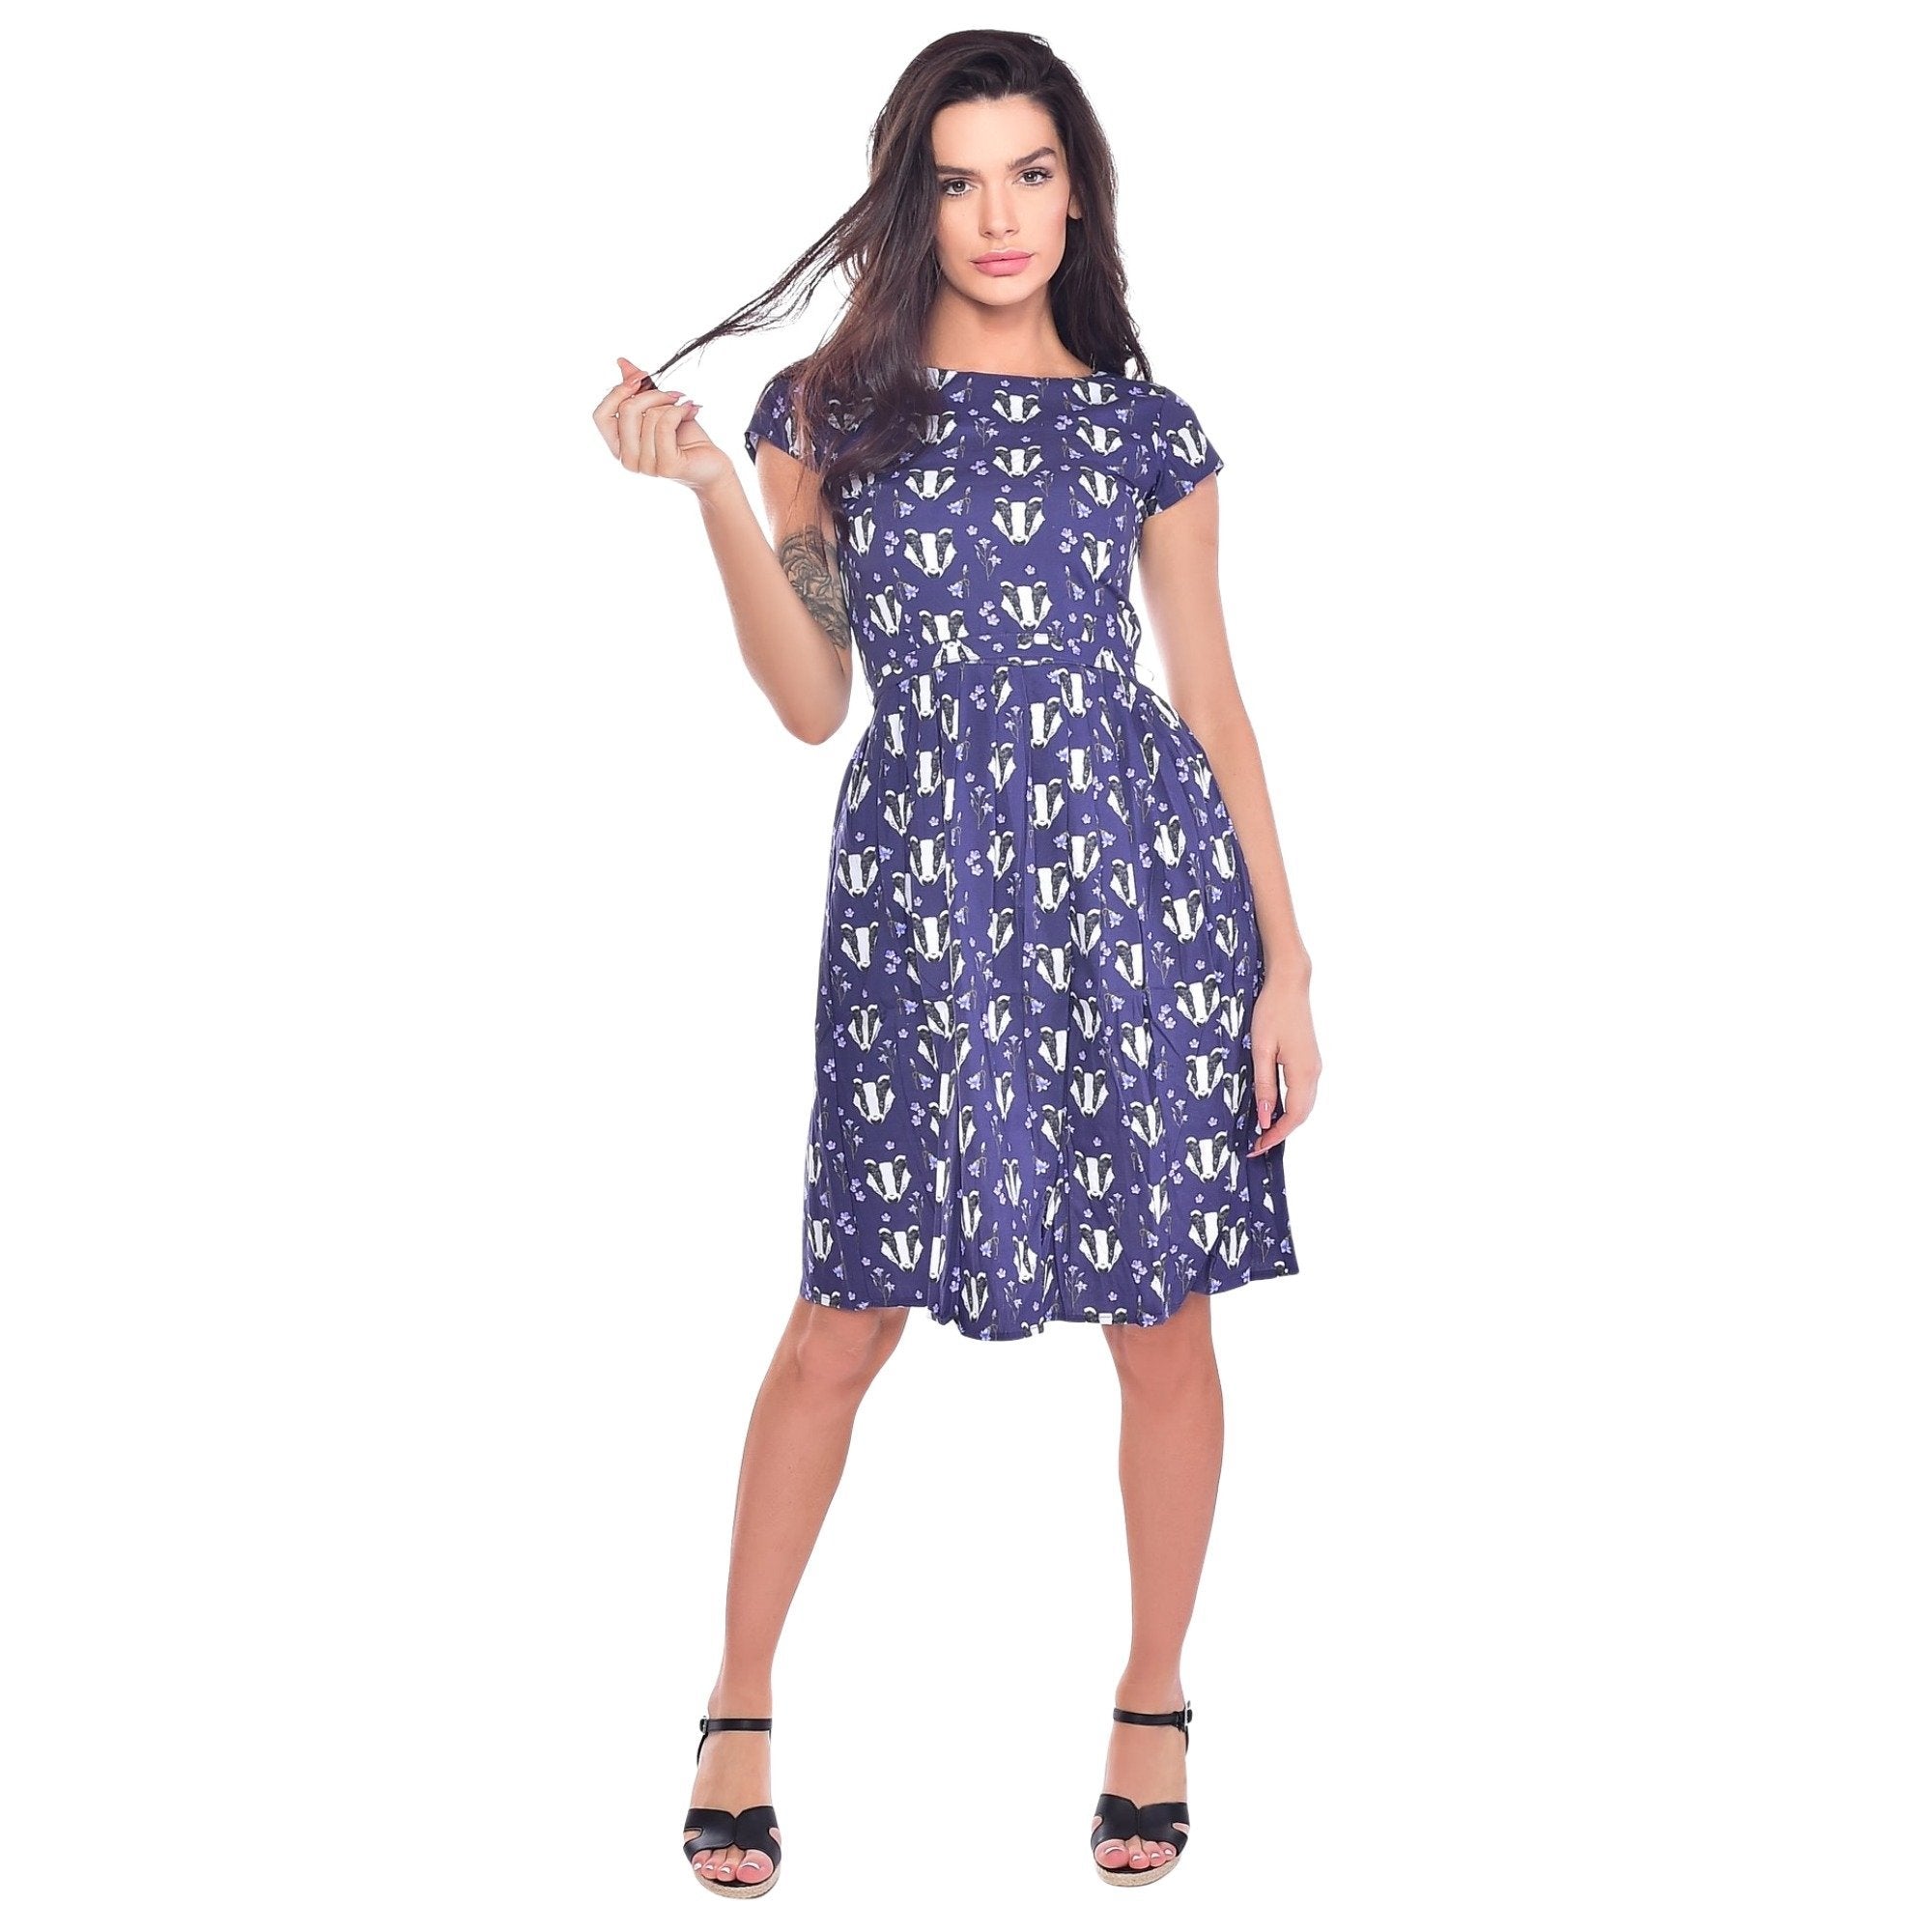 Run and Fly Cute Badger Print Dress 8 10 12 14 16 18 20 Blue Quirky ...